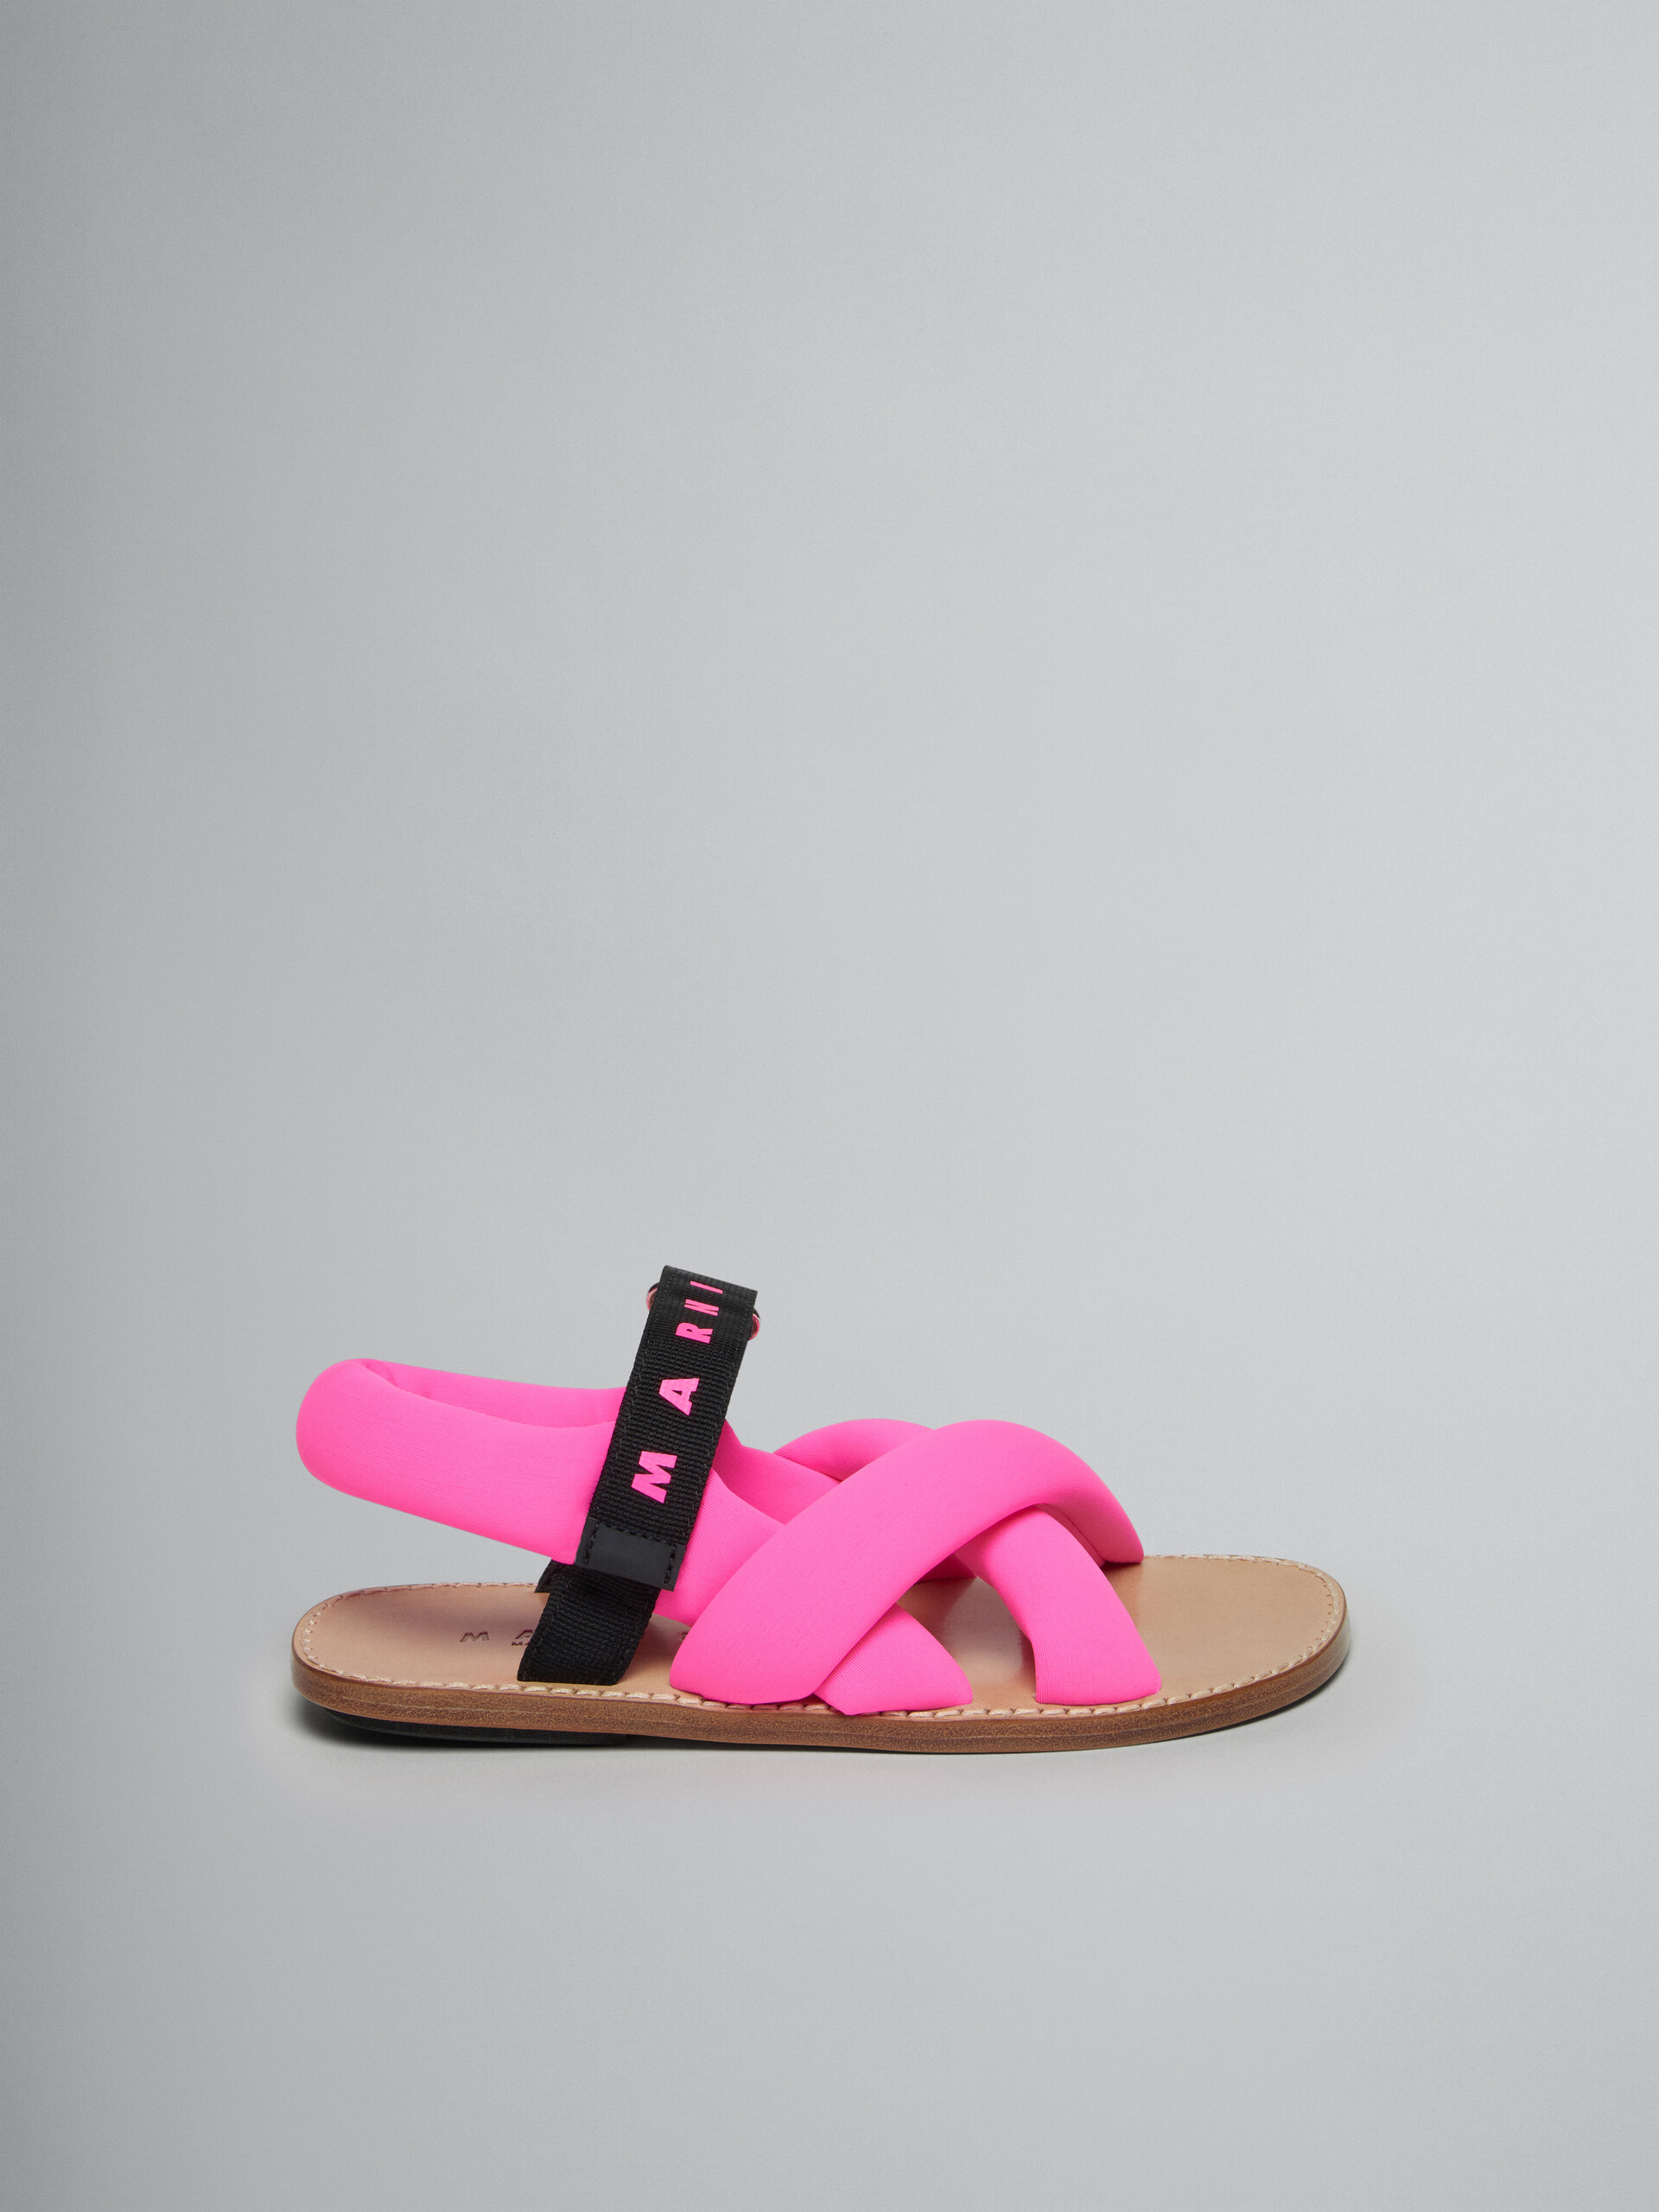 Padded sandals with logo | Marni